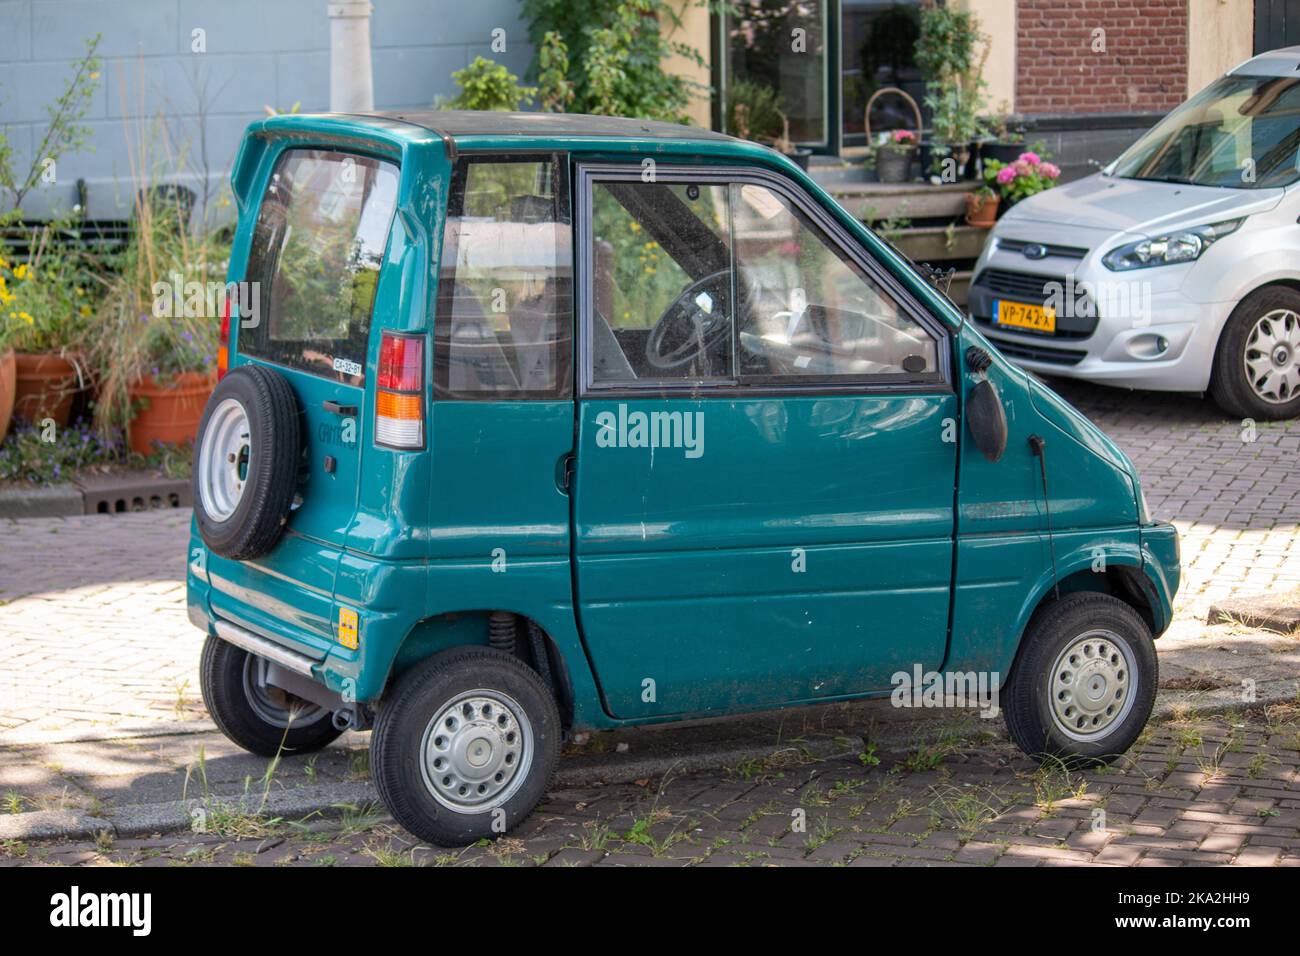 The tiny turquoise Canta LX car parked on a street, Amsterdam, Netherlands Stock Photo